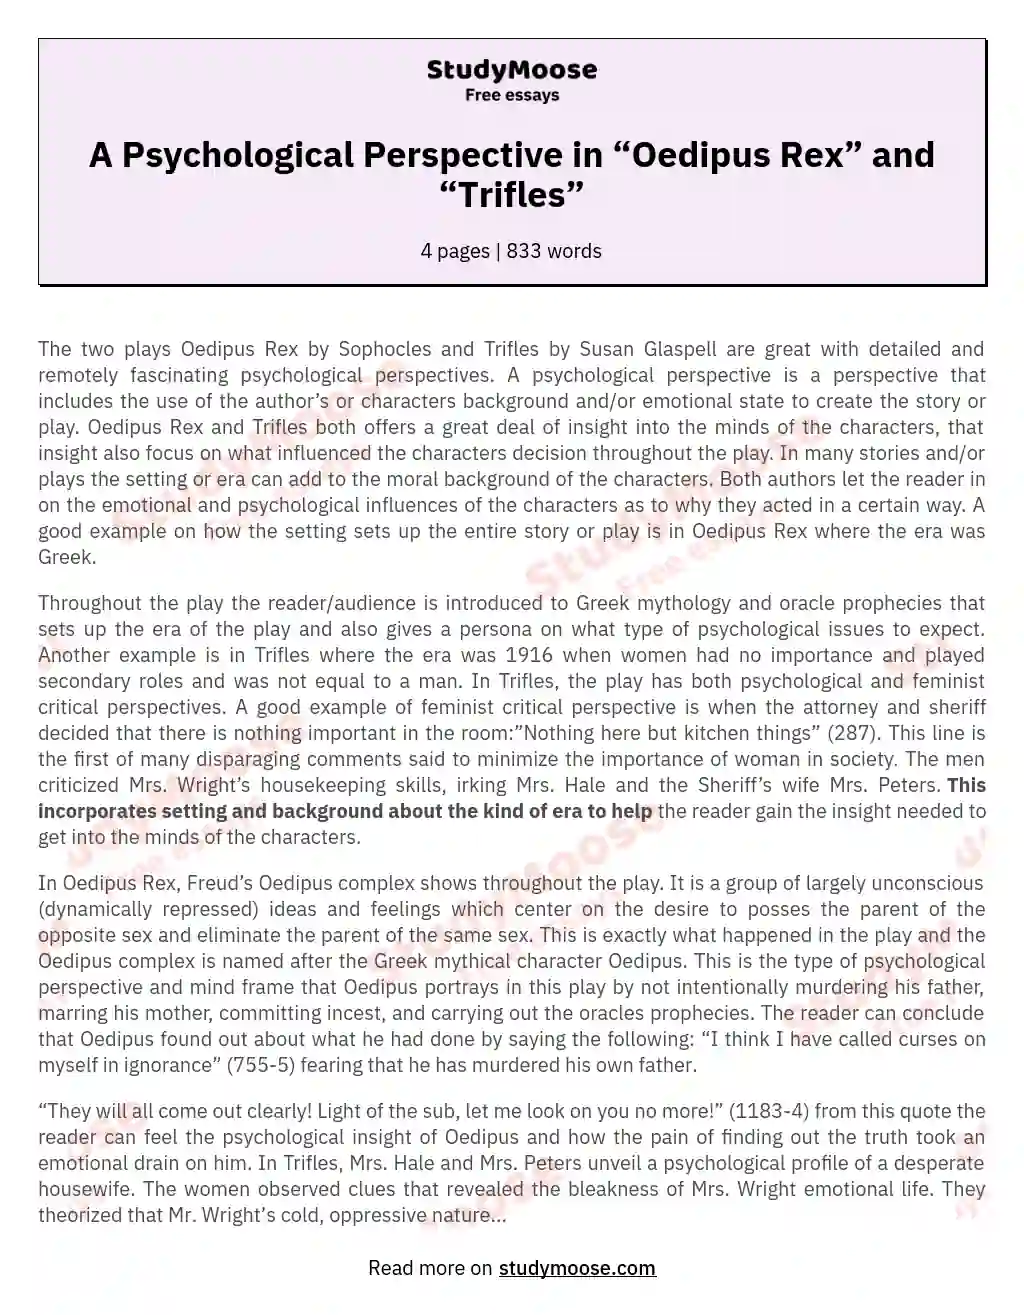 A Psychological Perspective in “Oedipus Rex” and “Trifles”